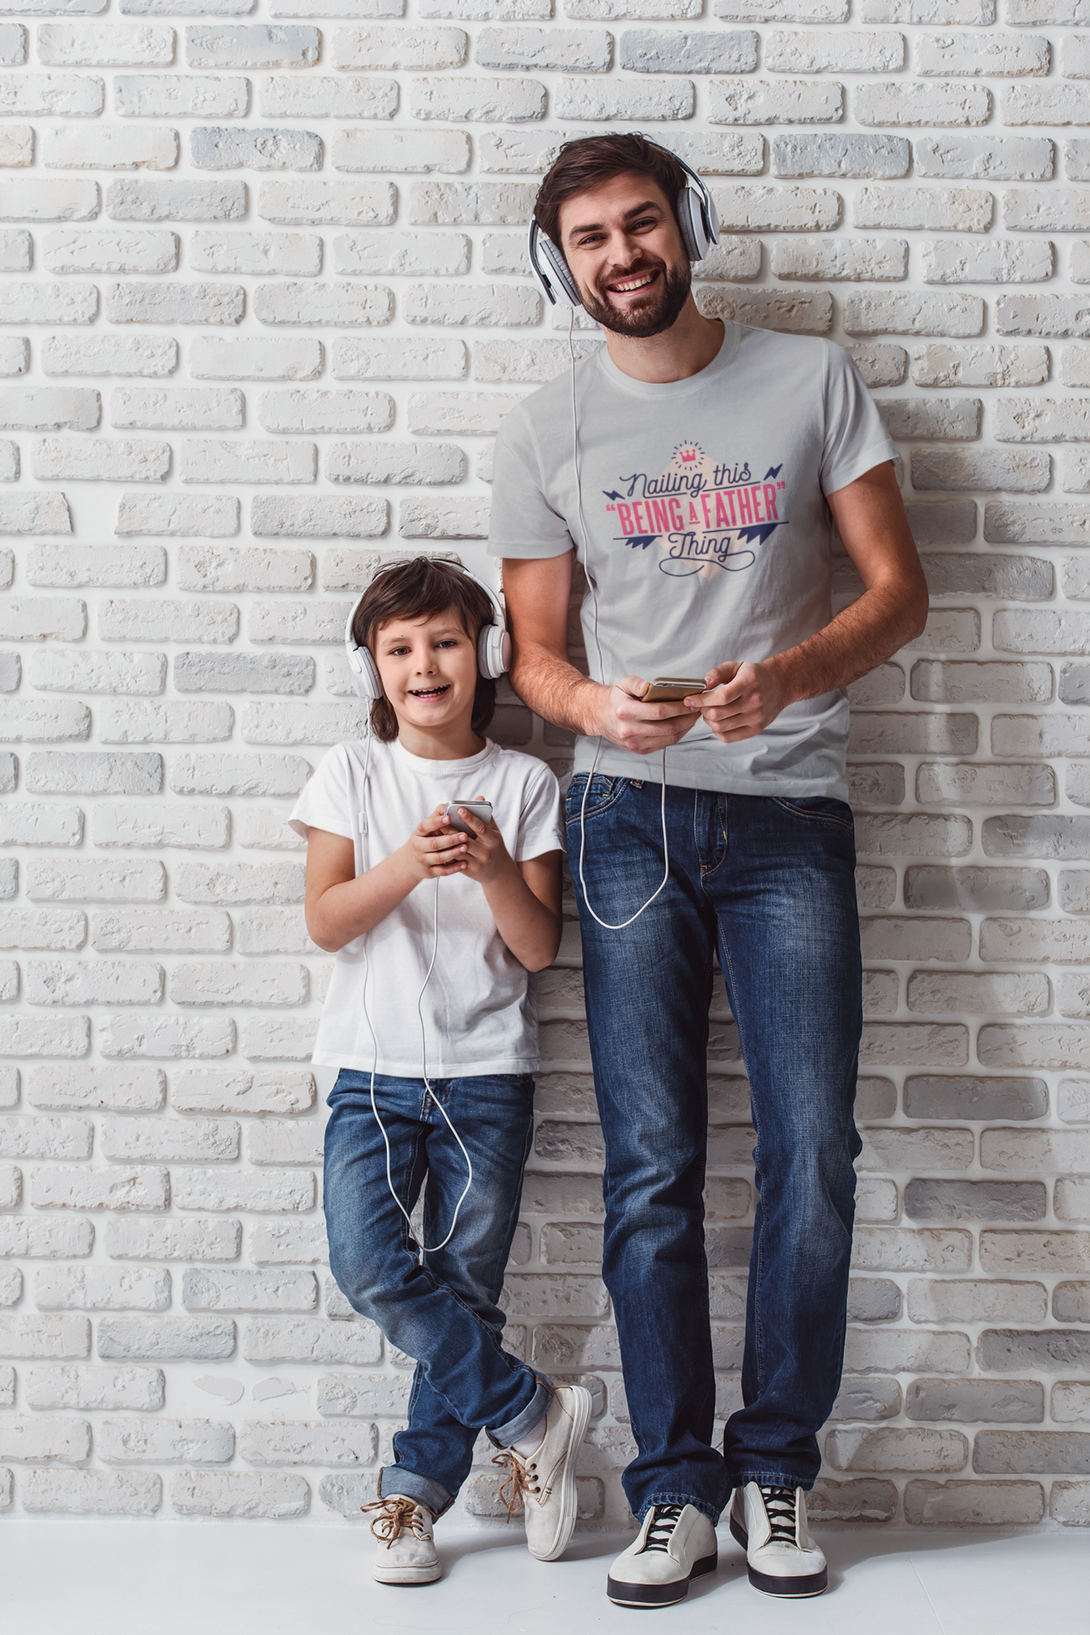 Nailing This Being A Father Thing Printed T-Shirt For Men - WowWaves - 6